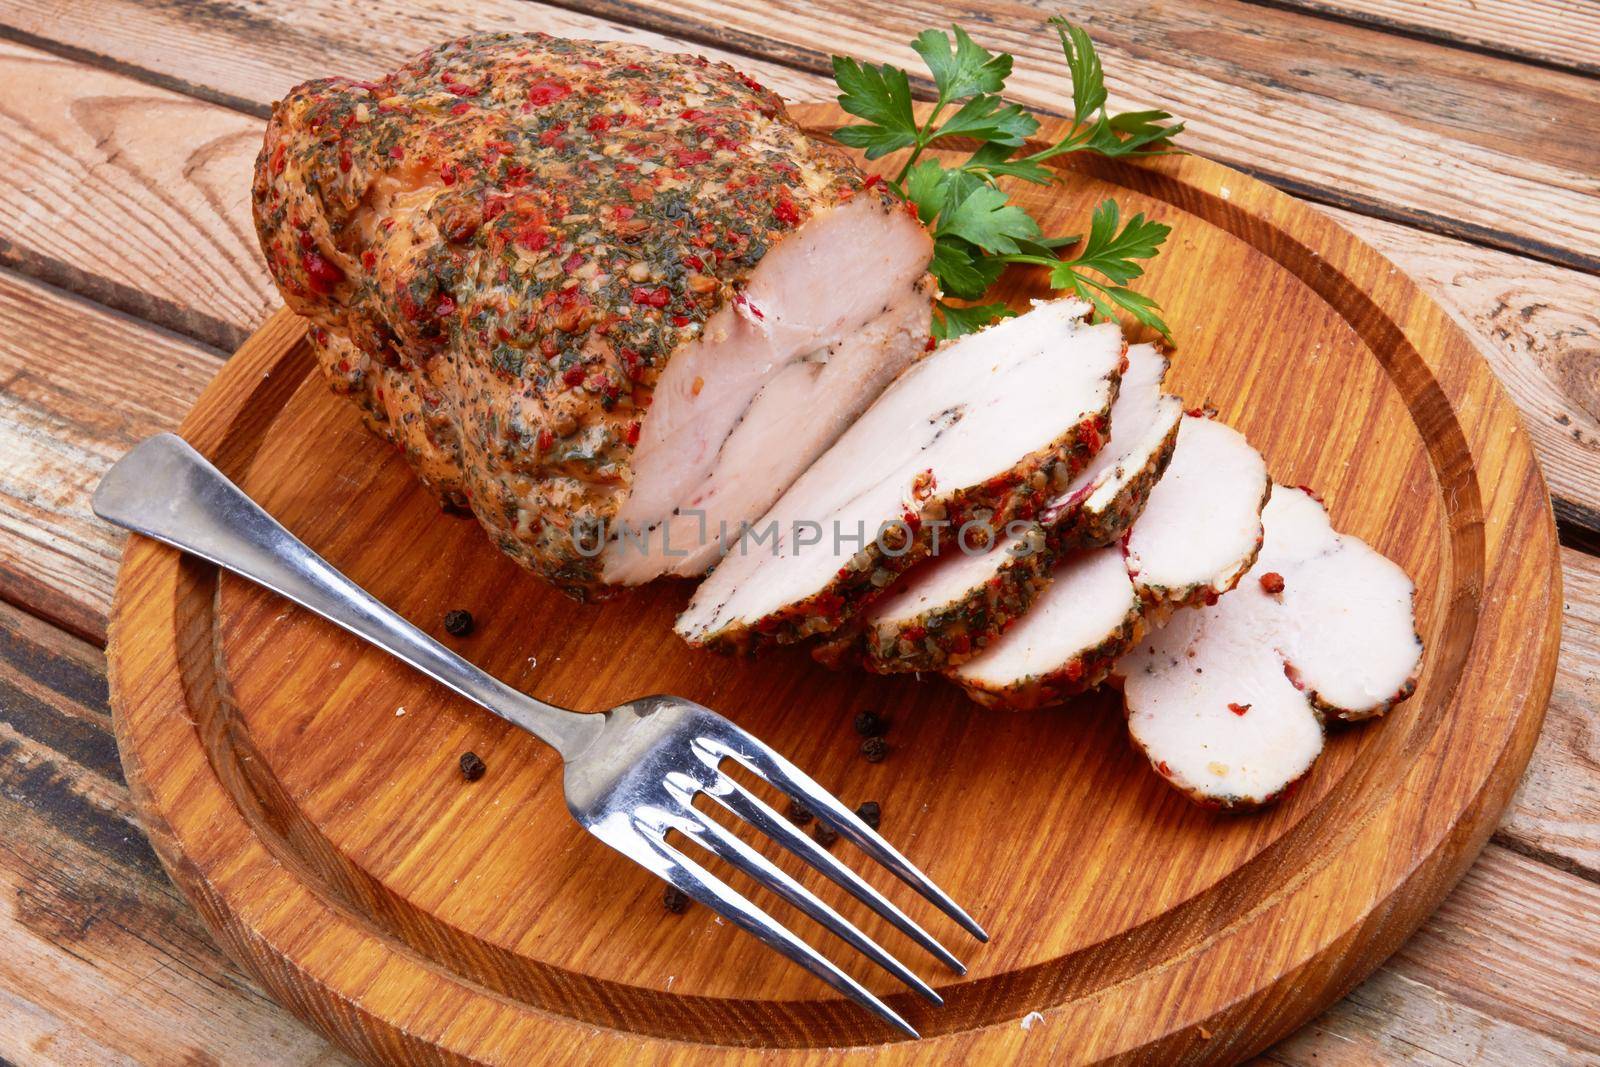 Baked meat on cutting board on wooden surface